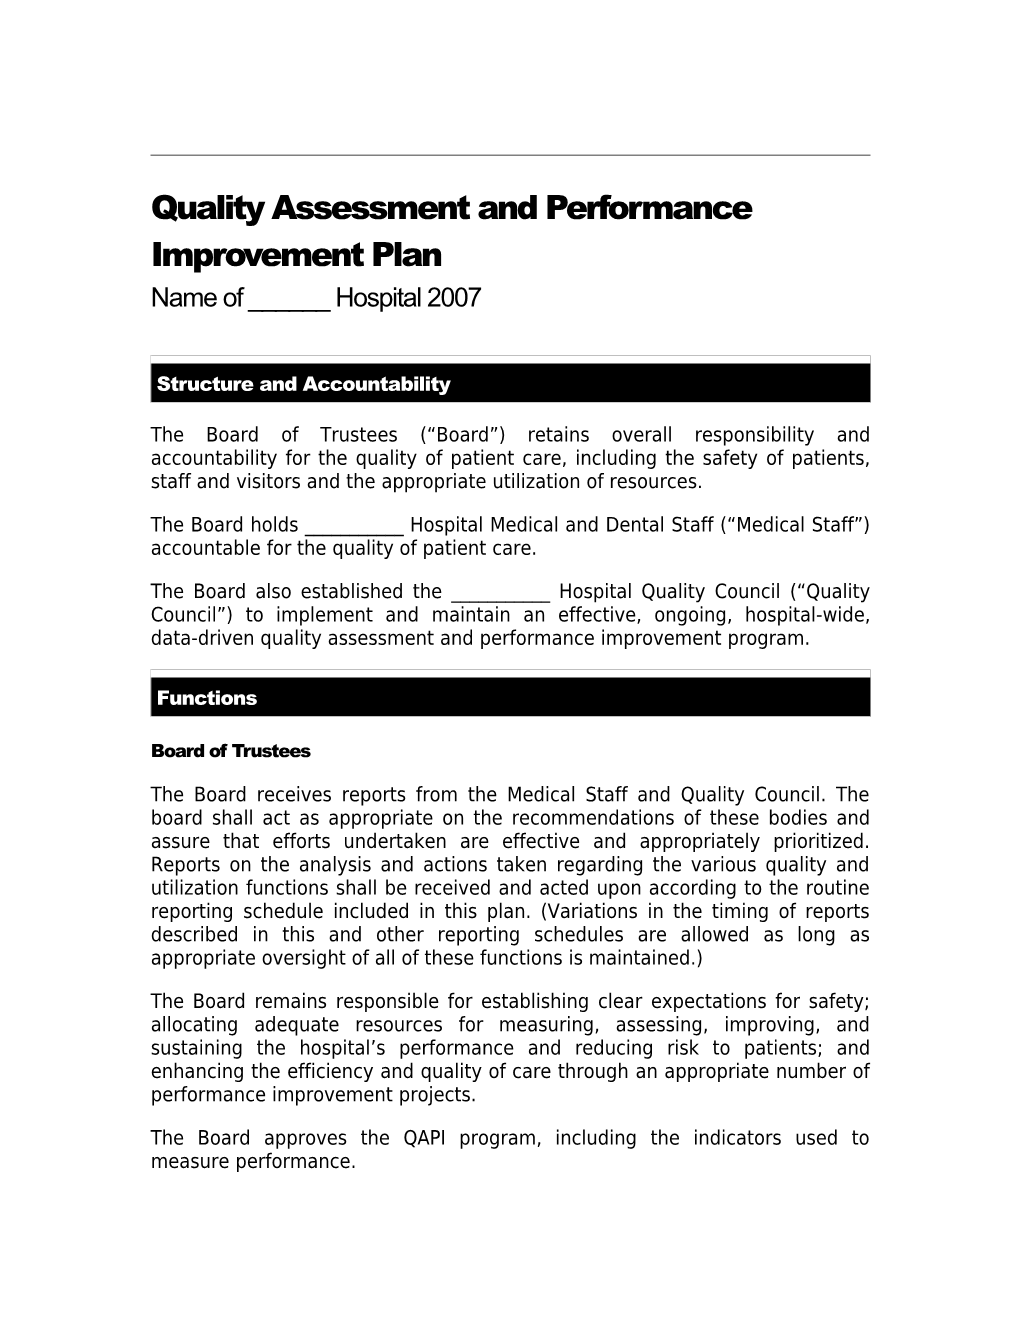 Revised Plan for Quality Assessment and Performance Improvement